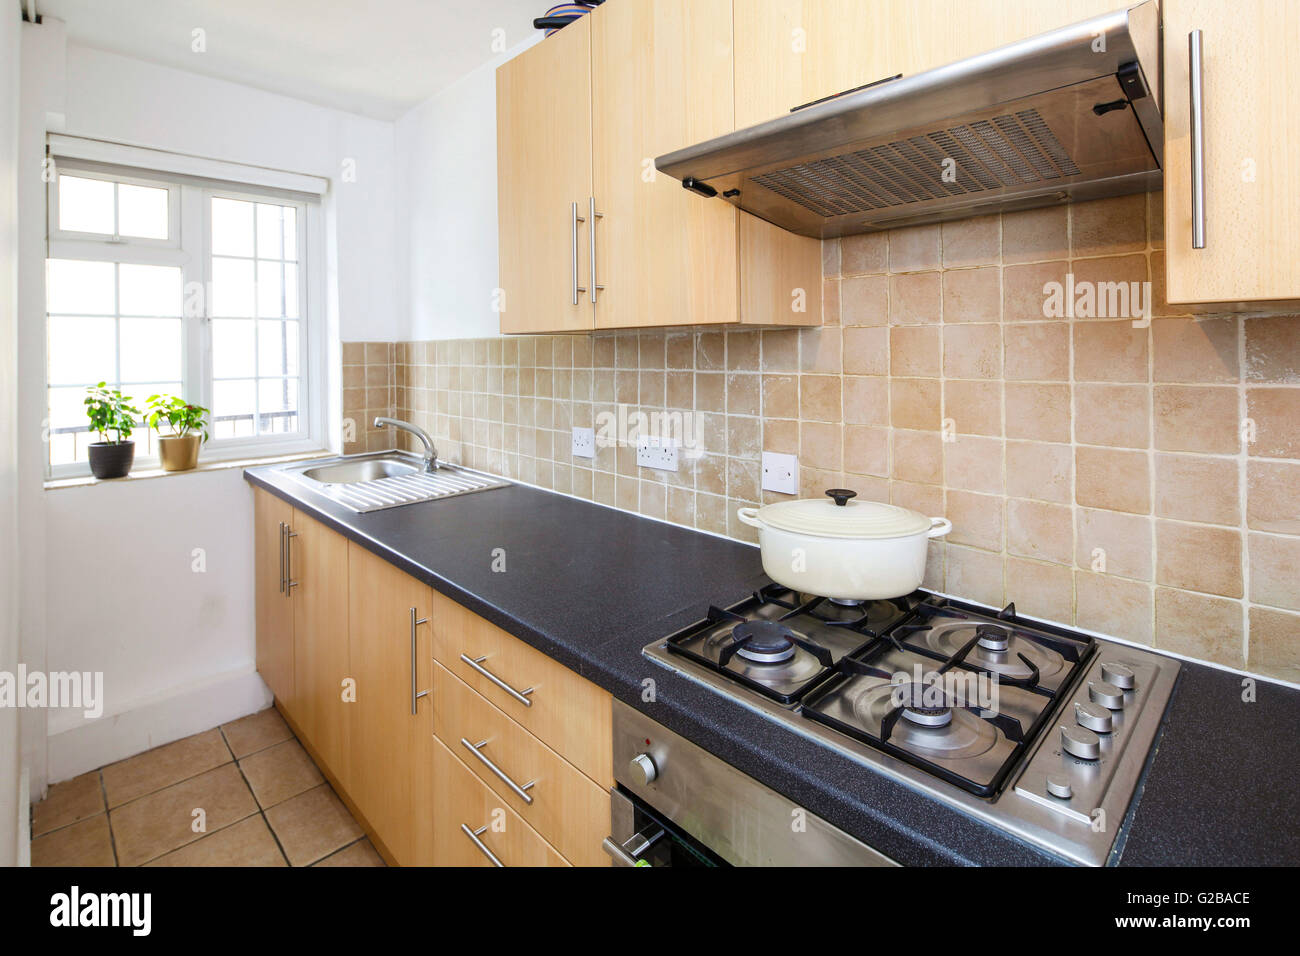 Creighton House, North London. Fresh and clean kitchen with wood cabinets and black countertops. Contemporary design. Stock Photo